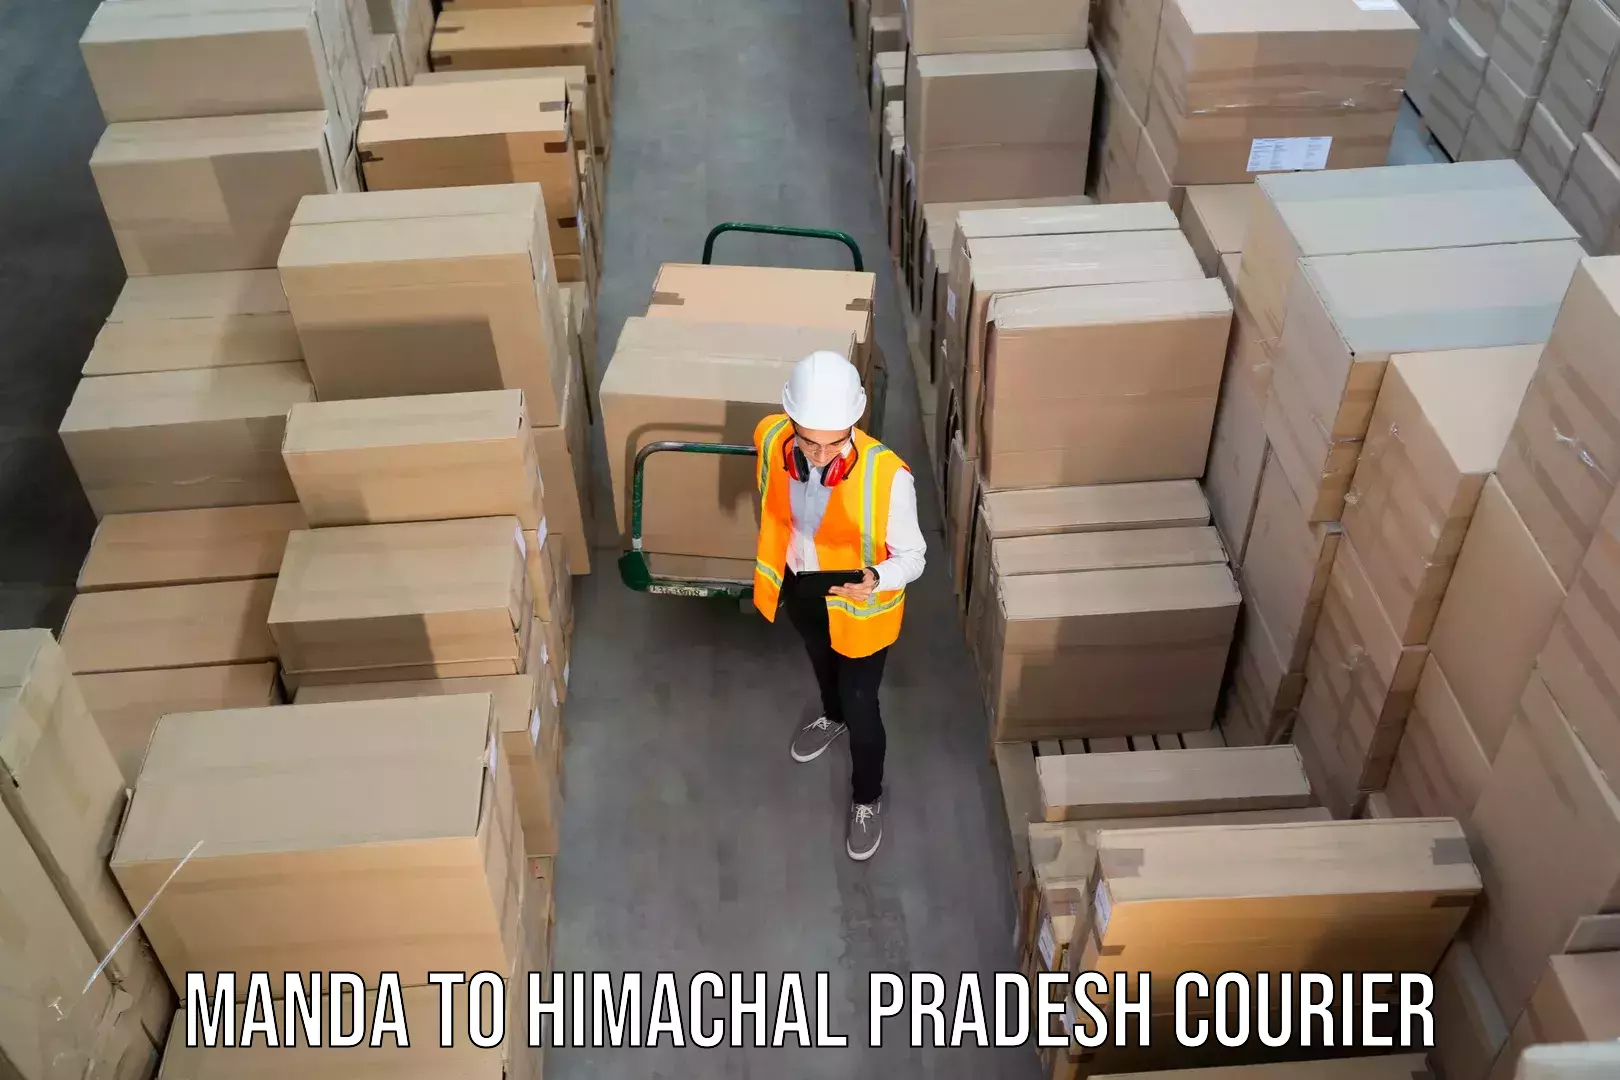 Express delivery solutions Manda to Himachal Pradesh